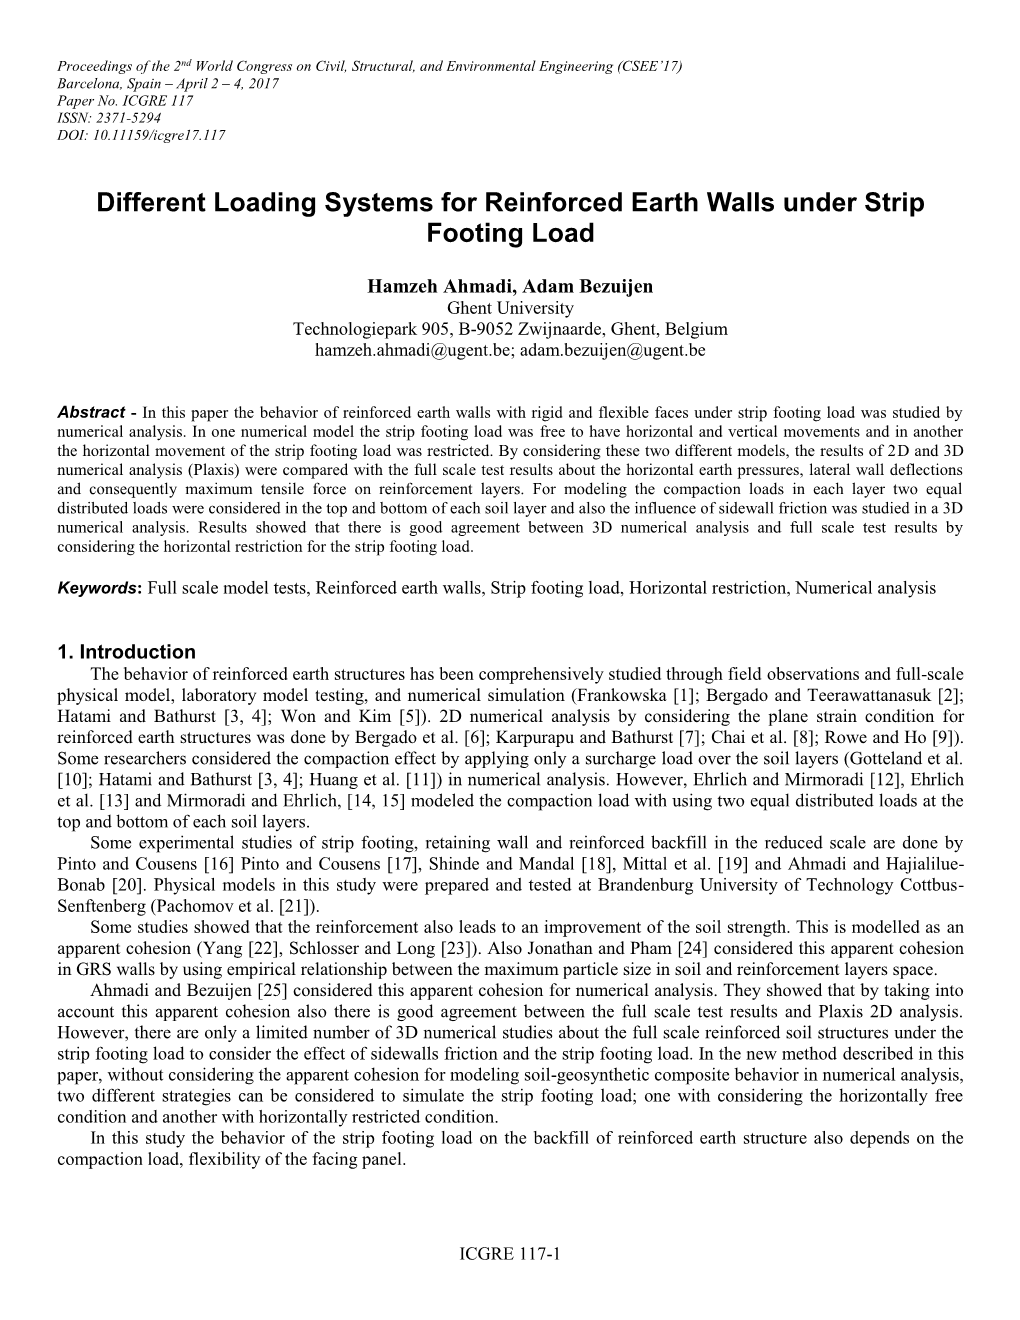 Different Loading Systems for Reinforced Earth Walls Under Strip Footing Load